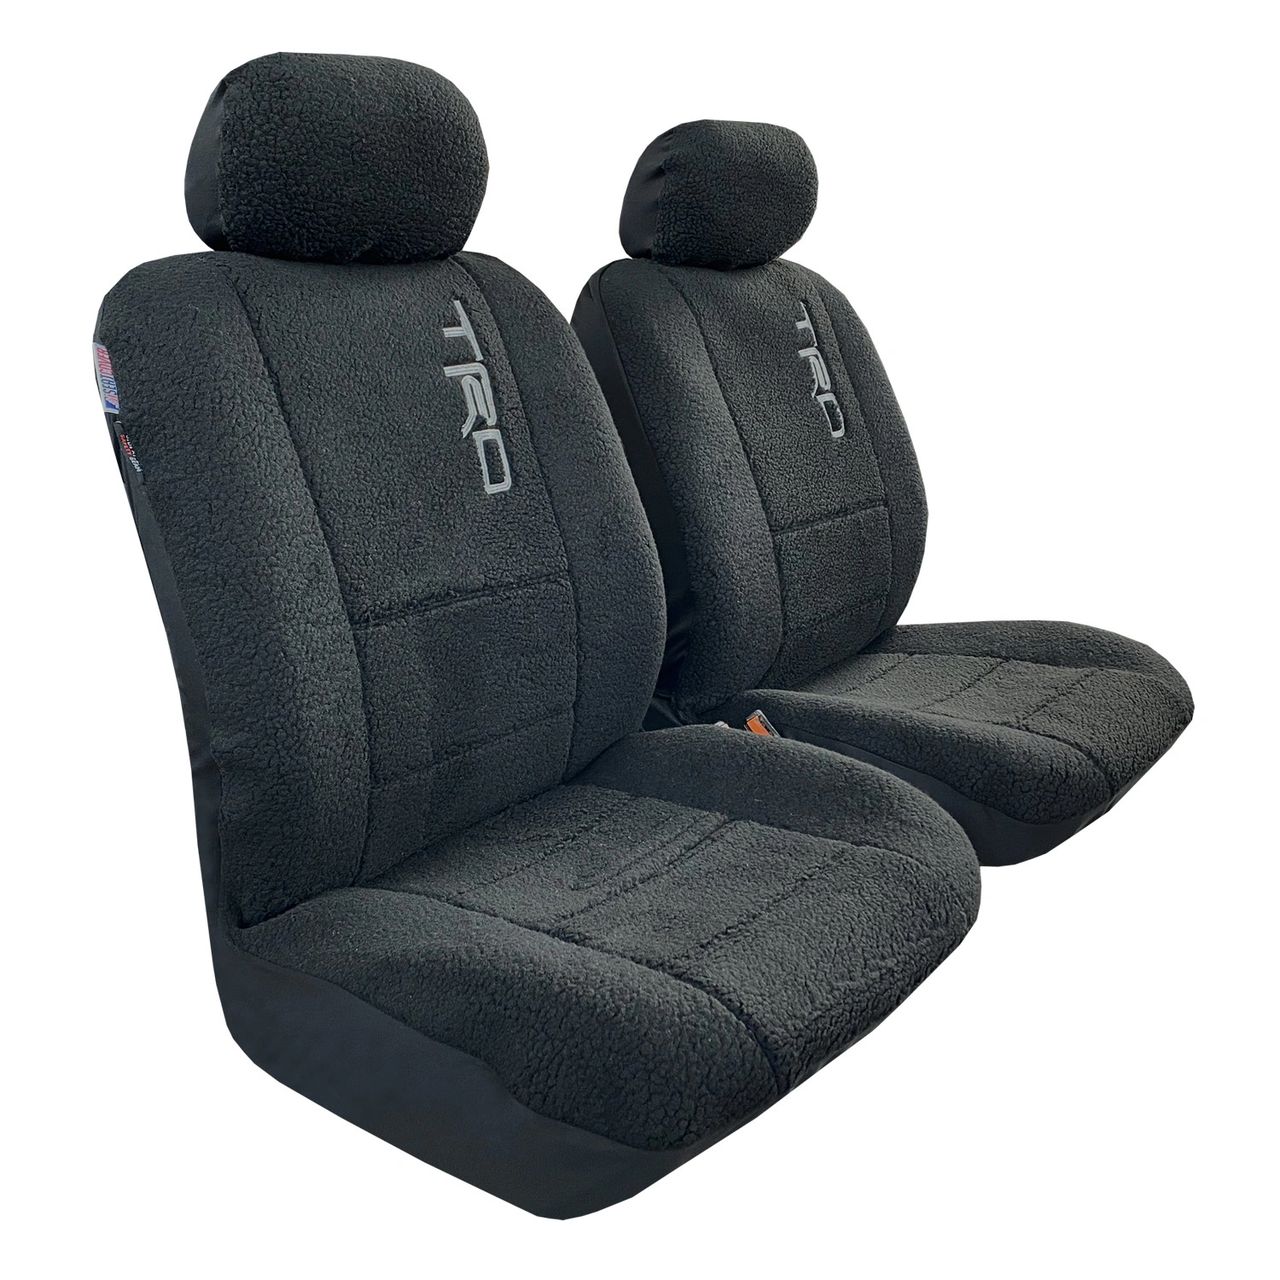 All New Toyota Trd Sheepskin Seat Covers